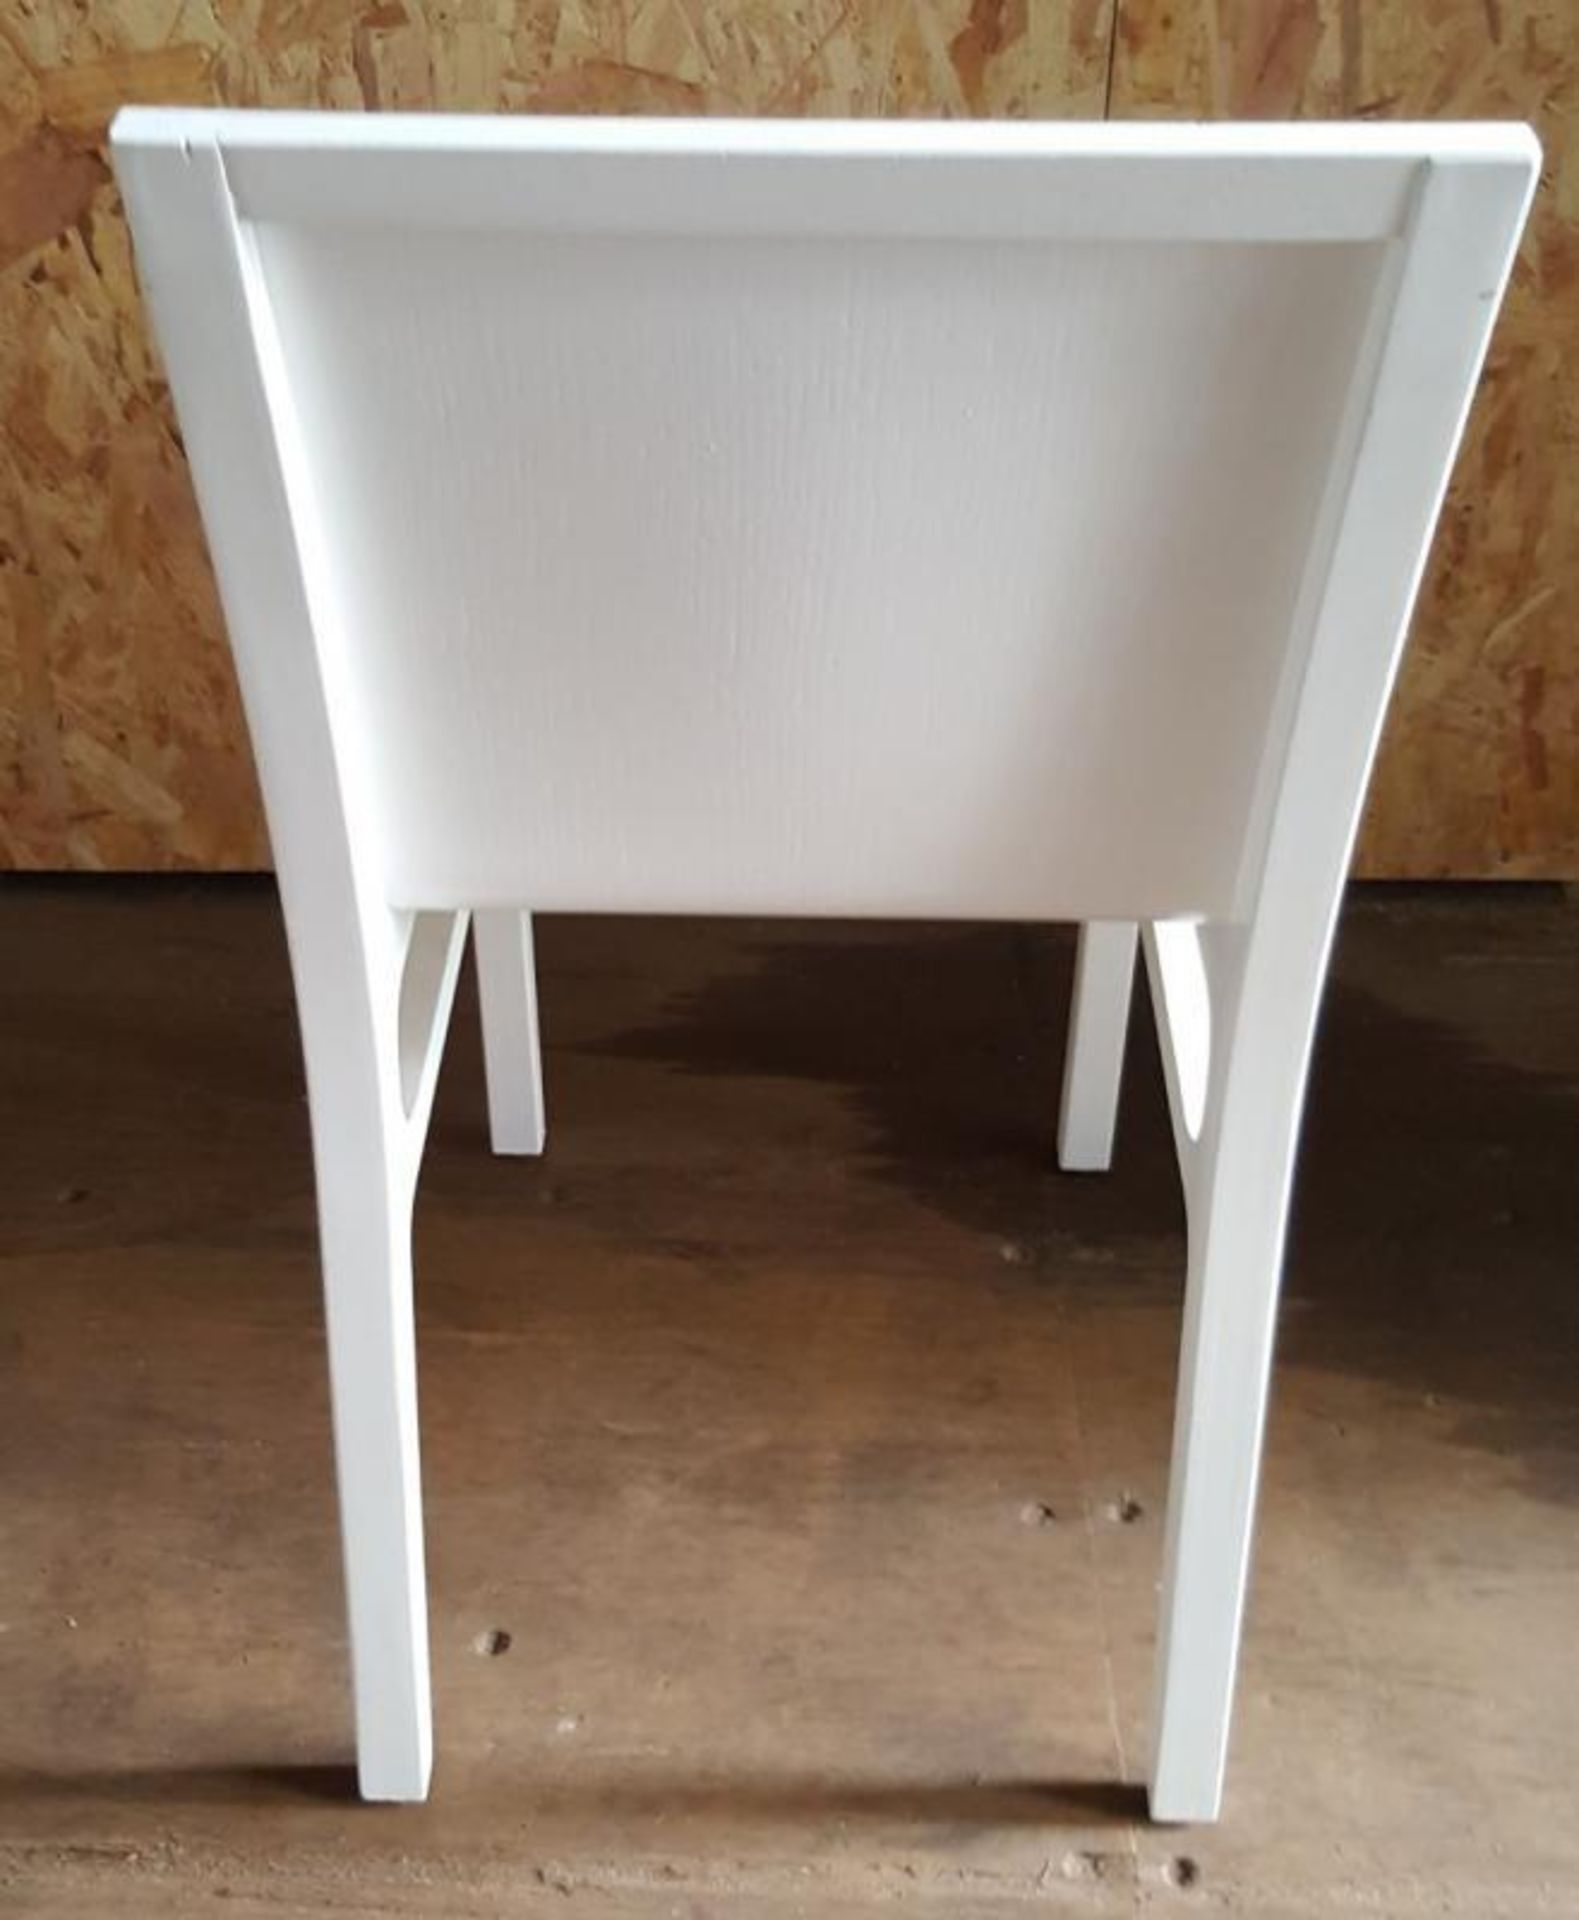 4 x Wooden Dining Chairs Set With A Bright White Finish - Dimensions: Used, In Good Condition - Ref - Image 4 of 6